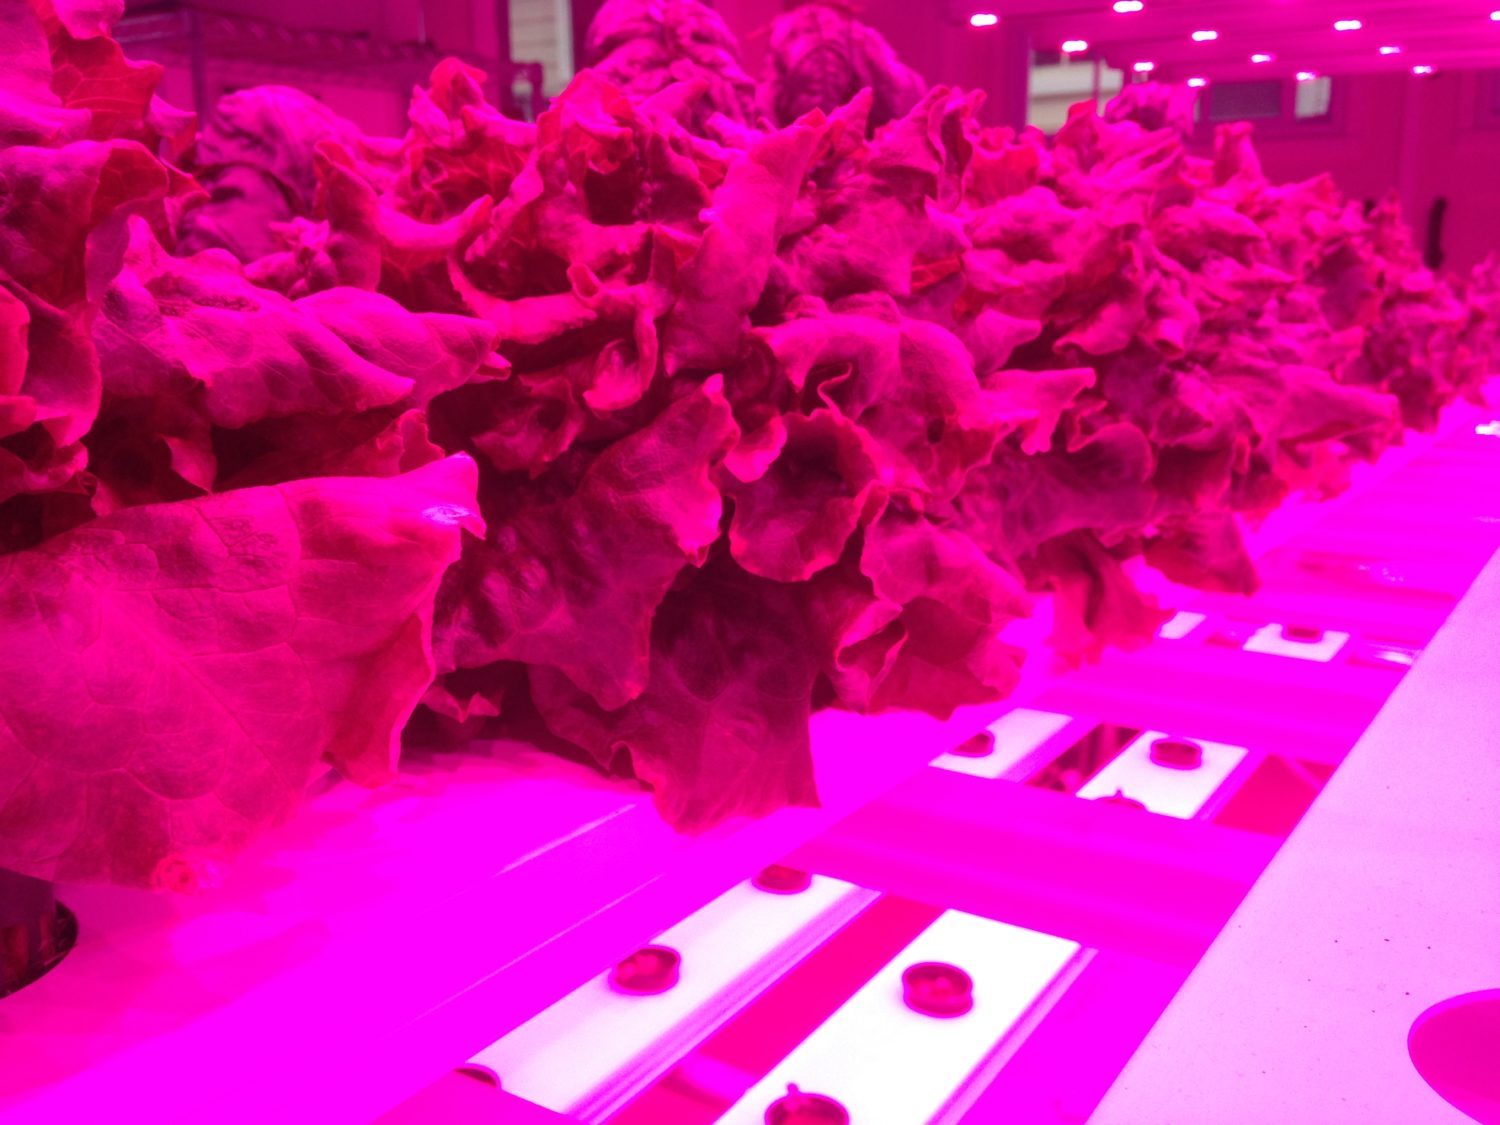 Ten strategic areas for indoor farming growth: recognition, metrics, investment, jobs, models, diversity, sustainability, training, research, economic ecosystems